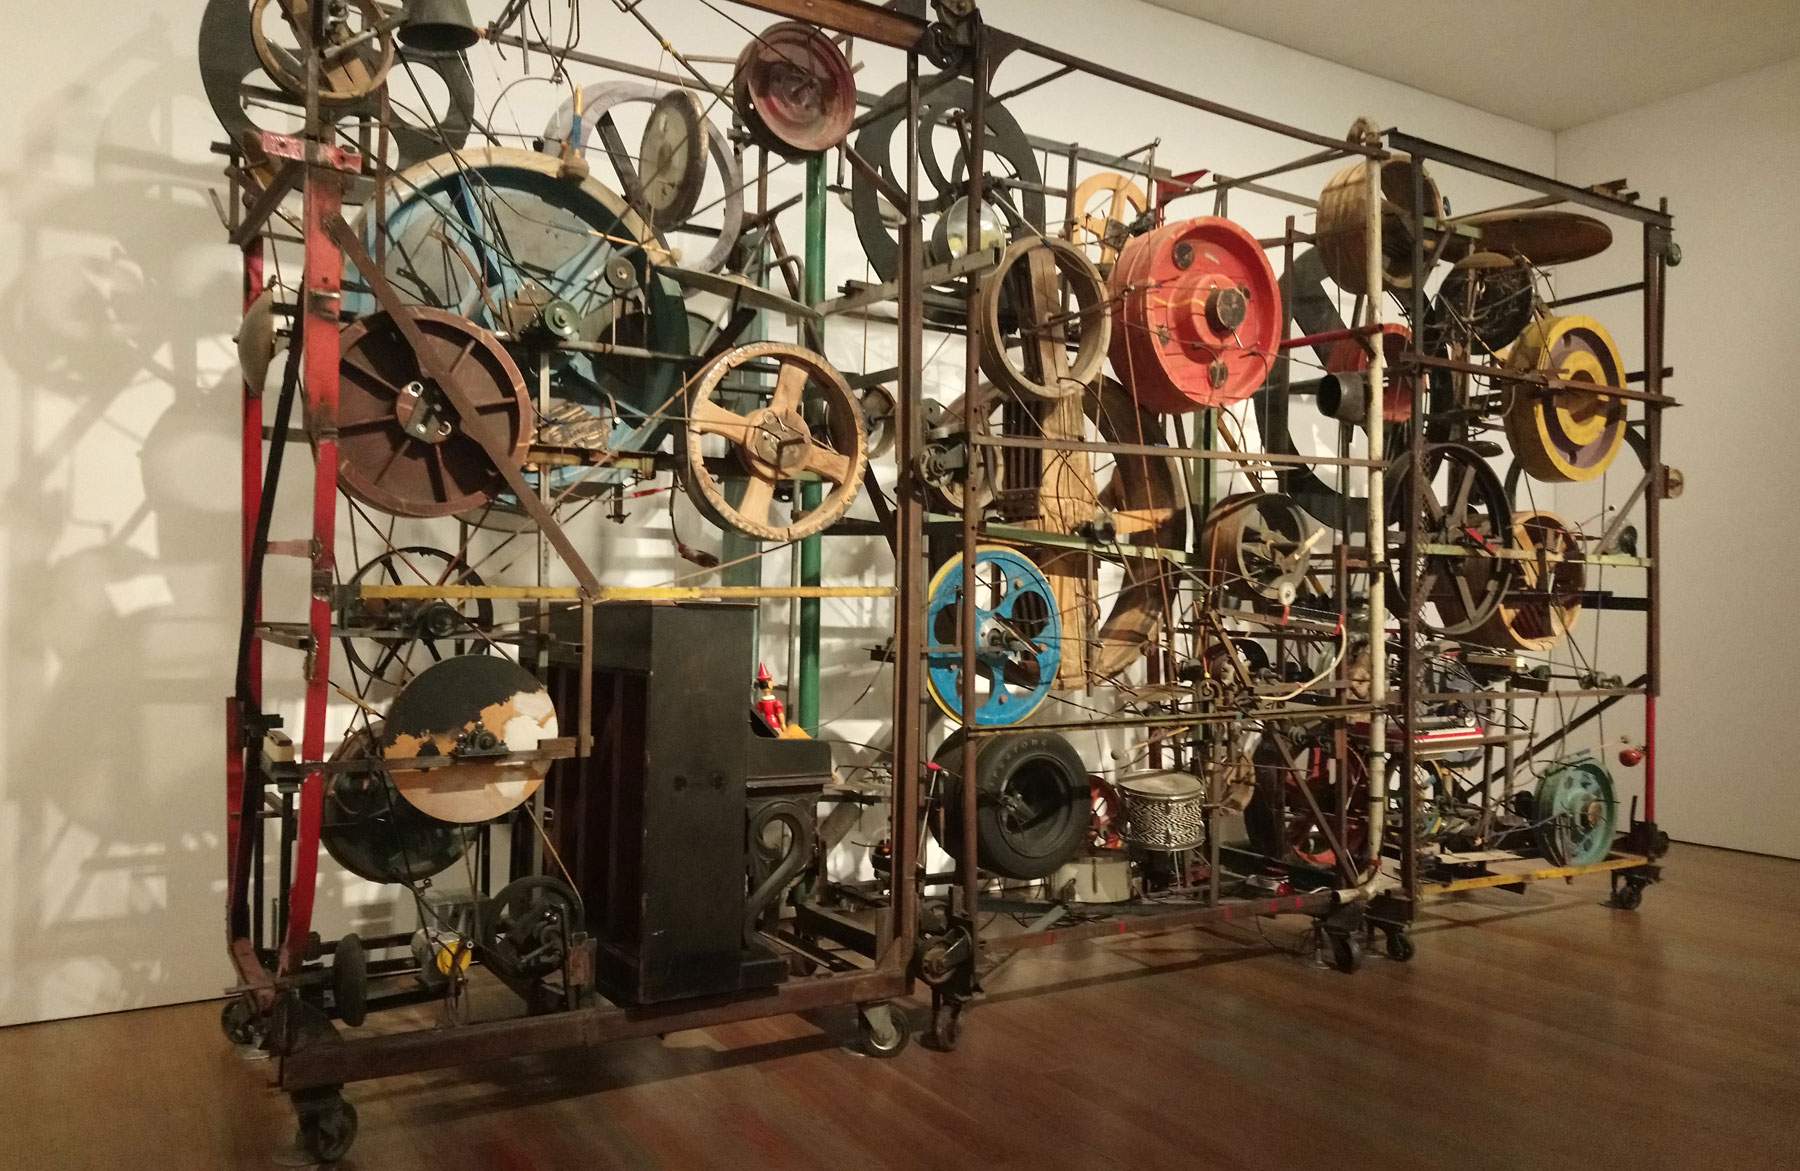 The engaging Tinguely Museum in Basel, the institution where Jean Tinguely's work lives on